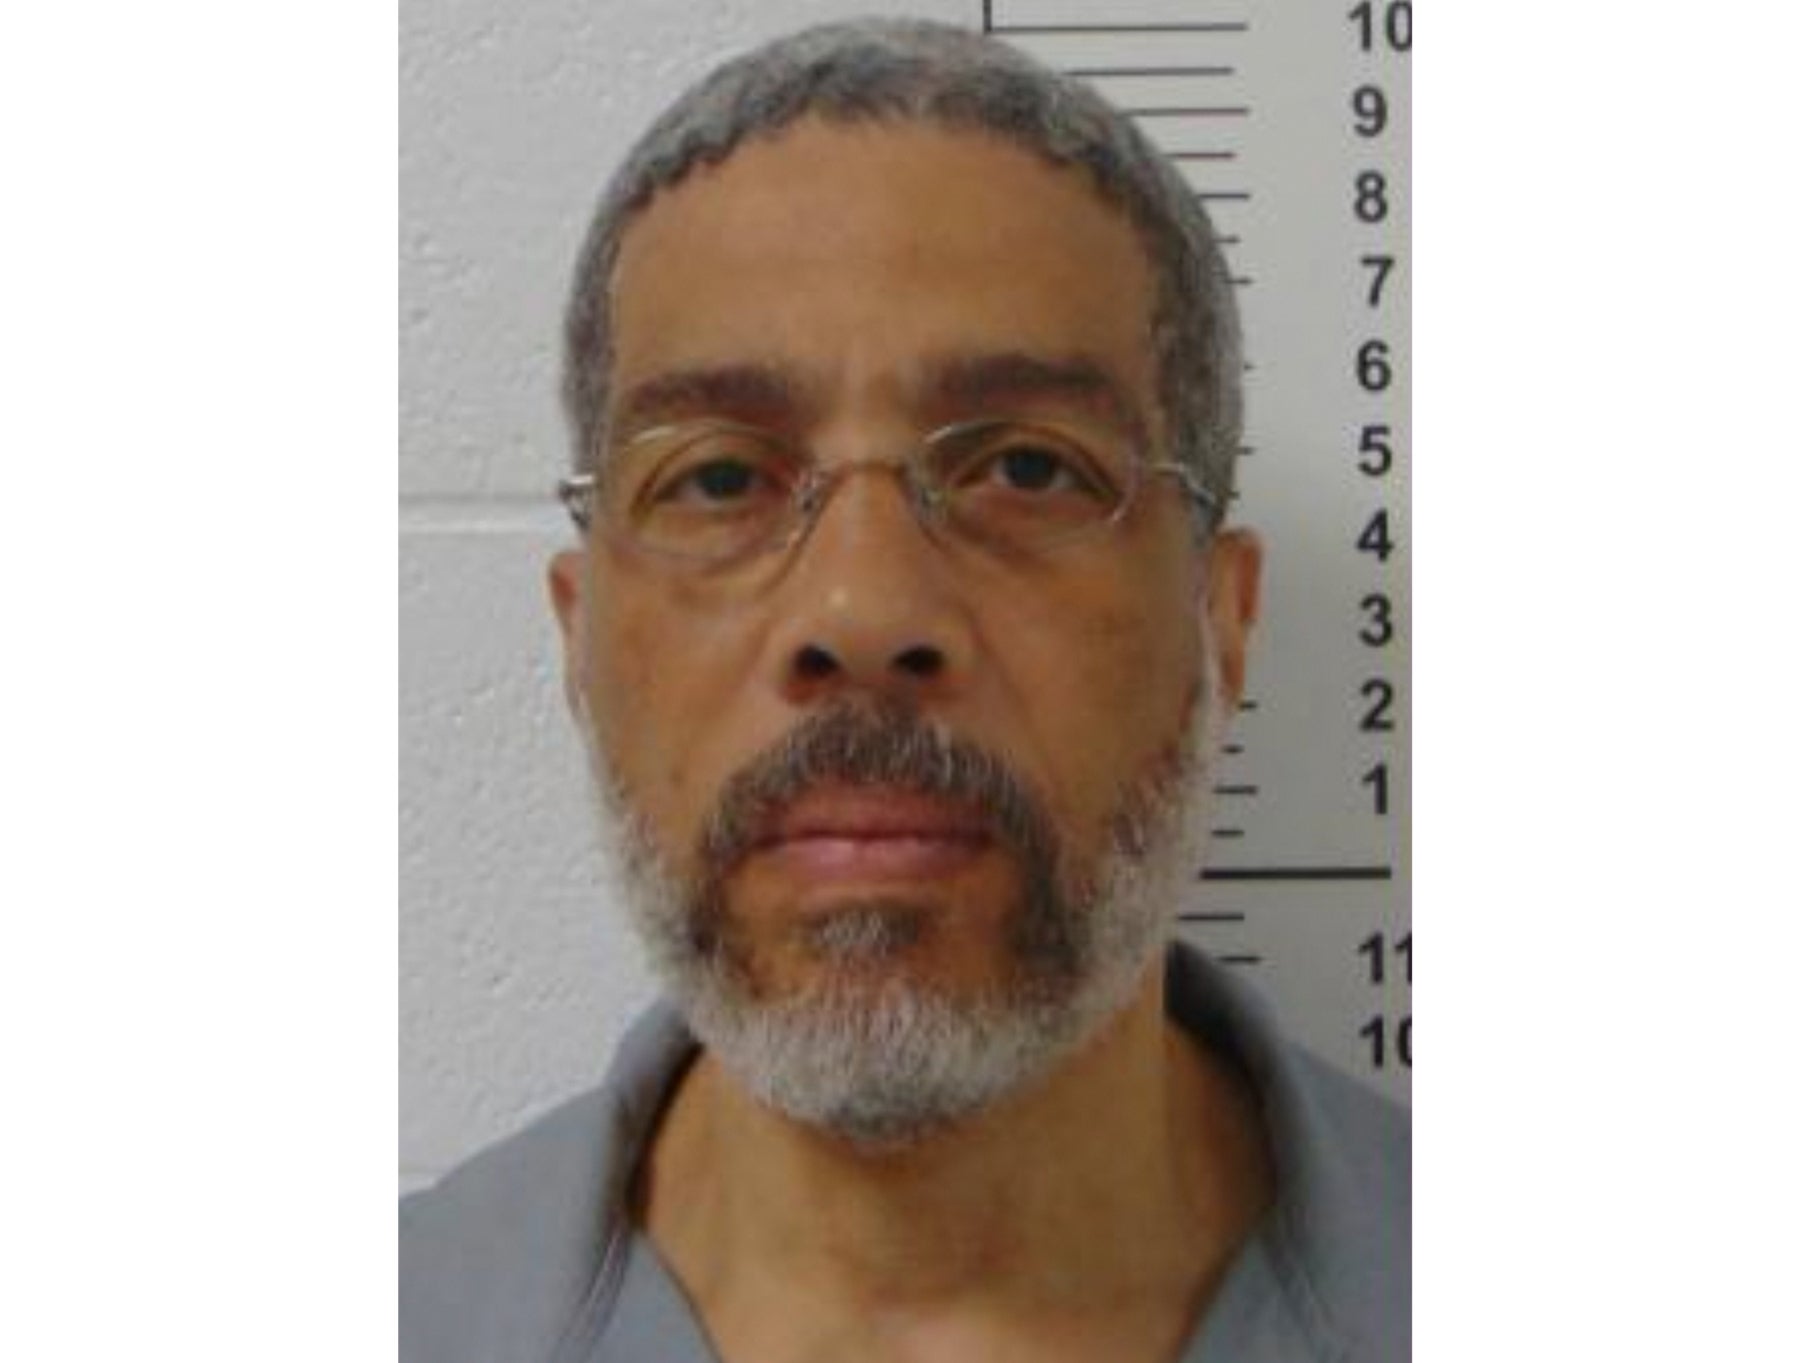 This booking photo provided by the Missouri Department of Corrections shows Leonard Taylor